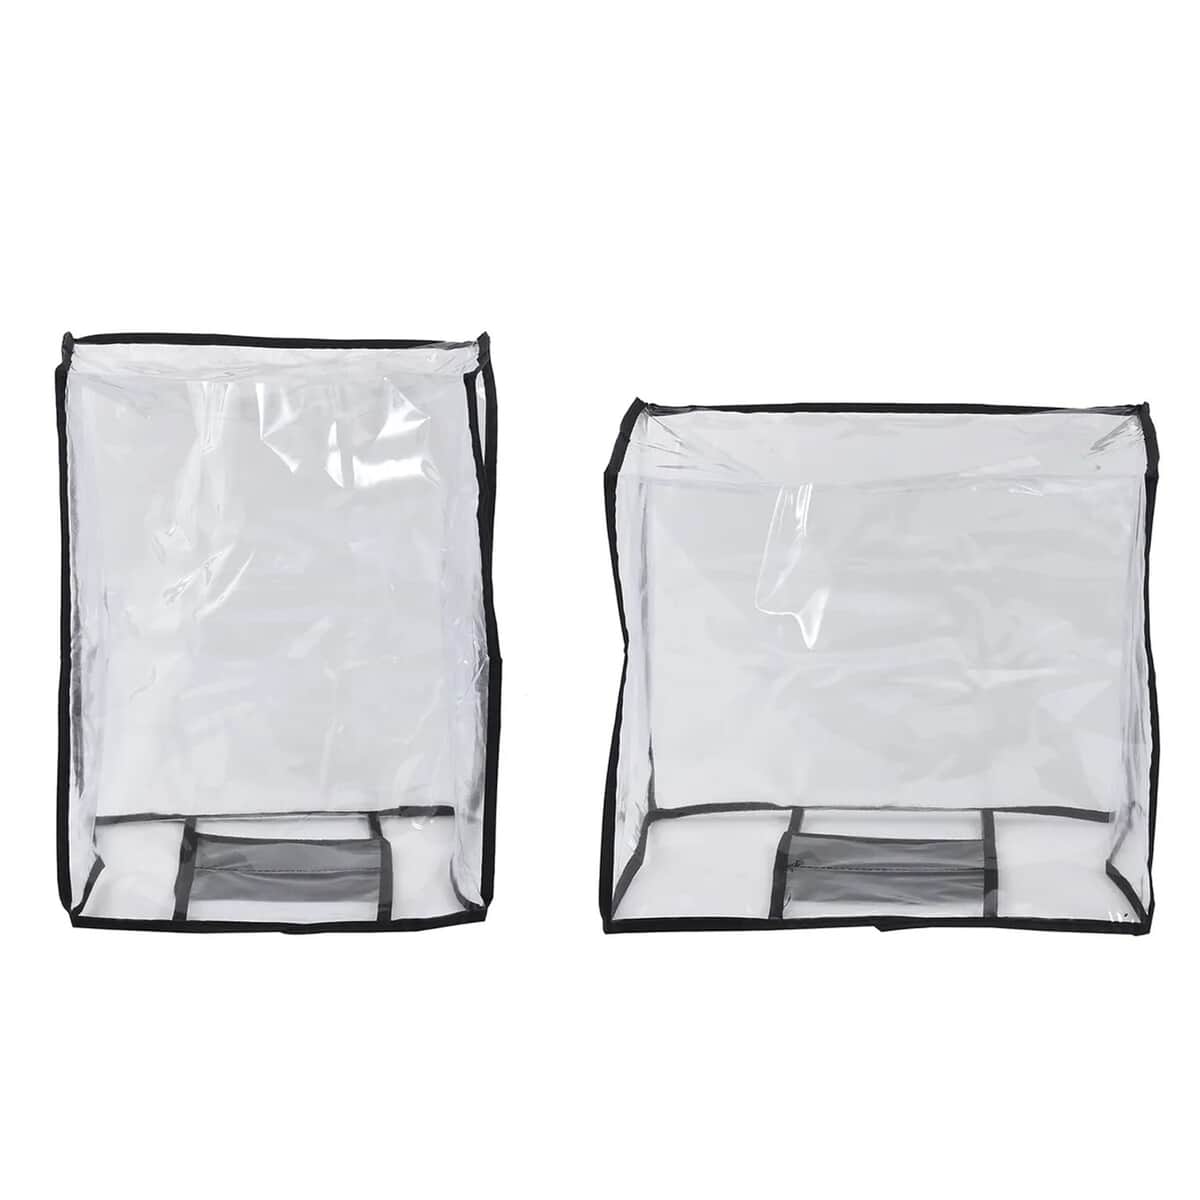 Set of 2 Transparent Waterproof Luggage Cover image number 4